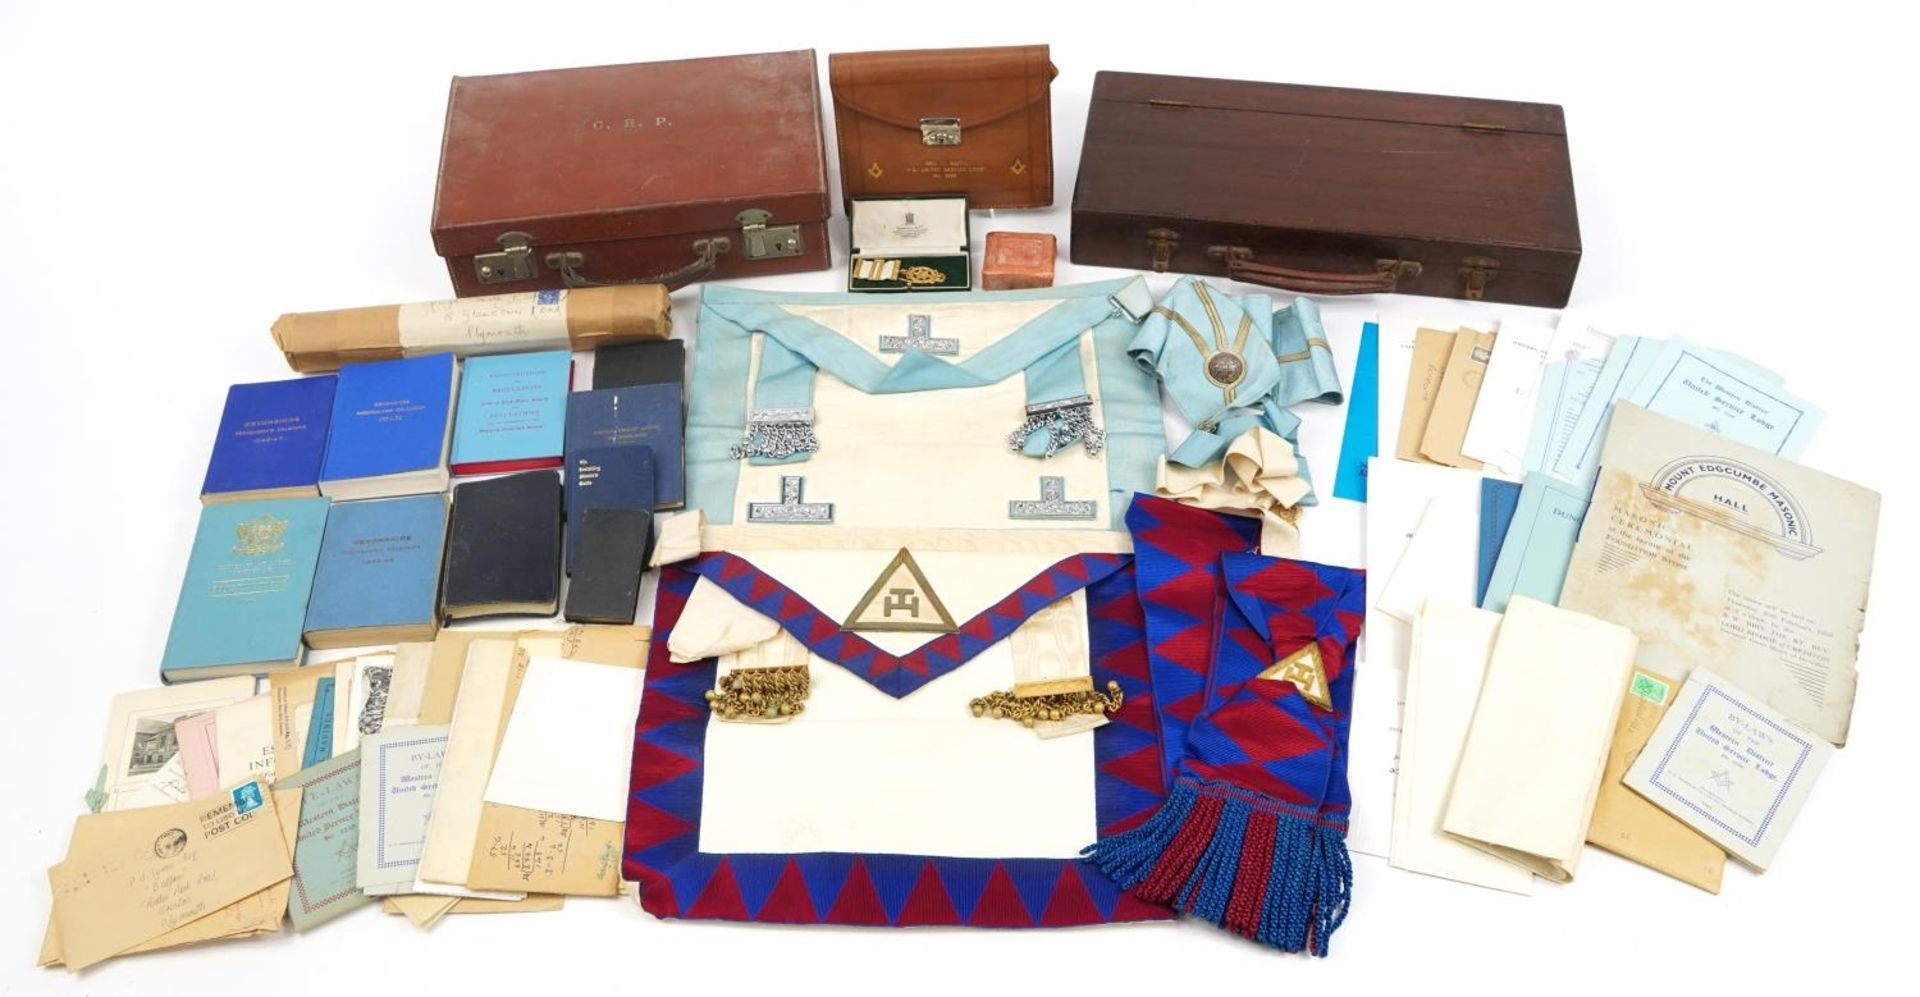 Masonic regalia relating to Bro H Smith, housed in a tan leather case, retailed by Webb & Sons